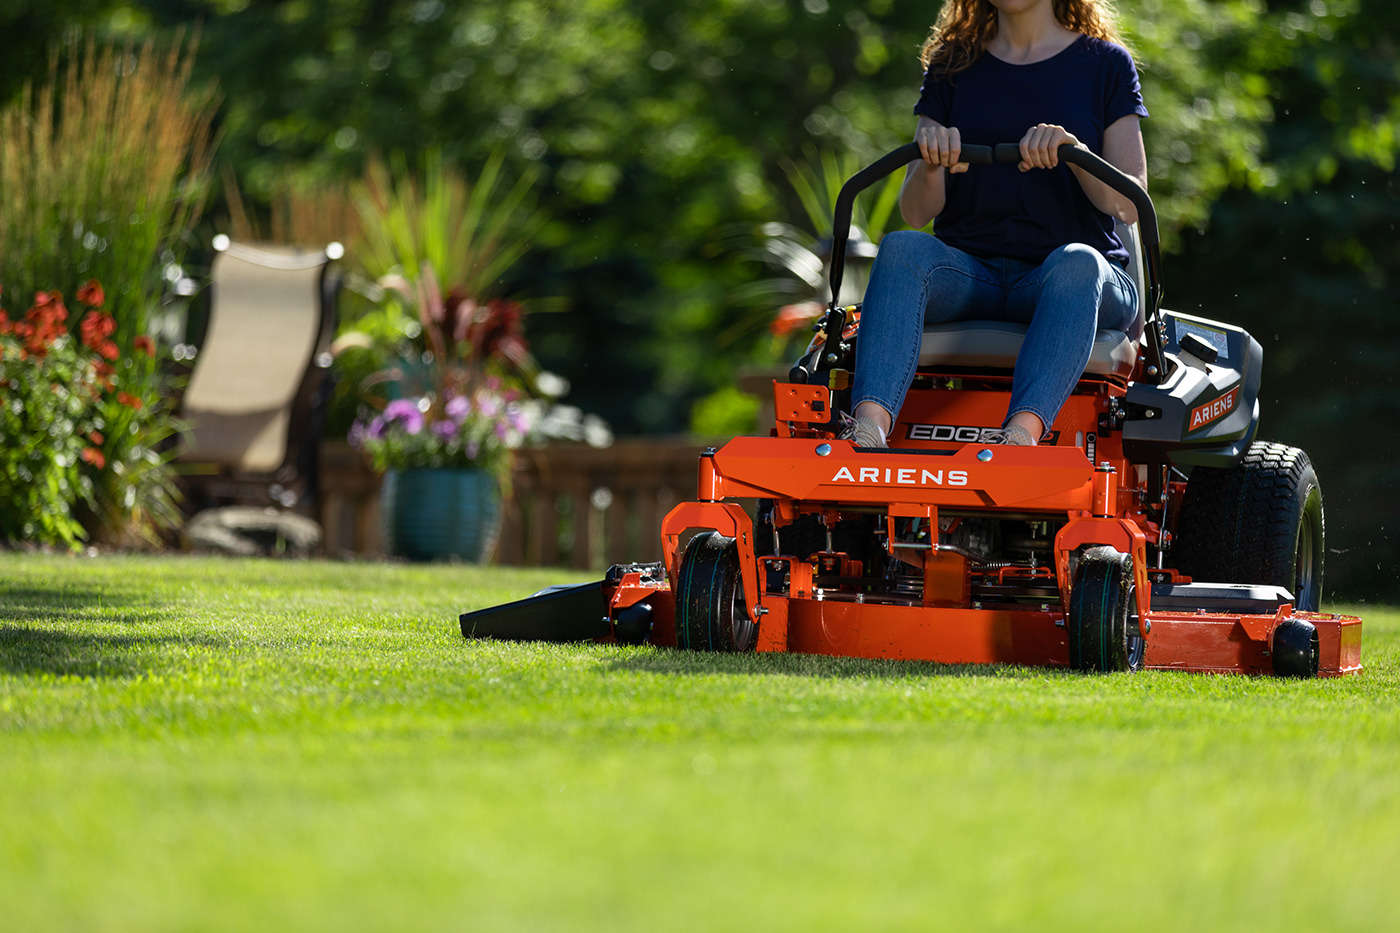 Advertising  commercial photographer Photography  photoshoot Product Photography landscaping lawn mower